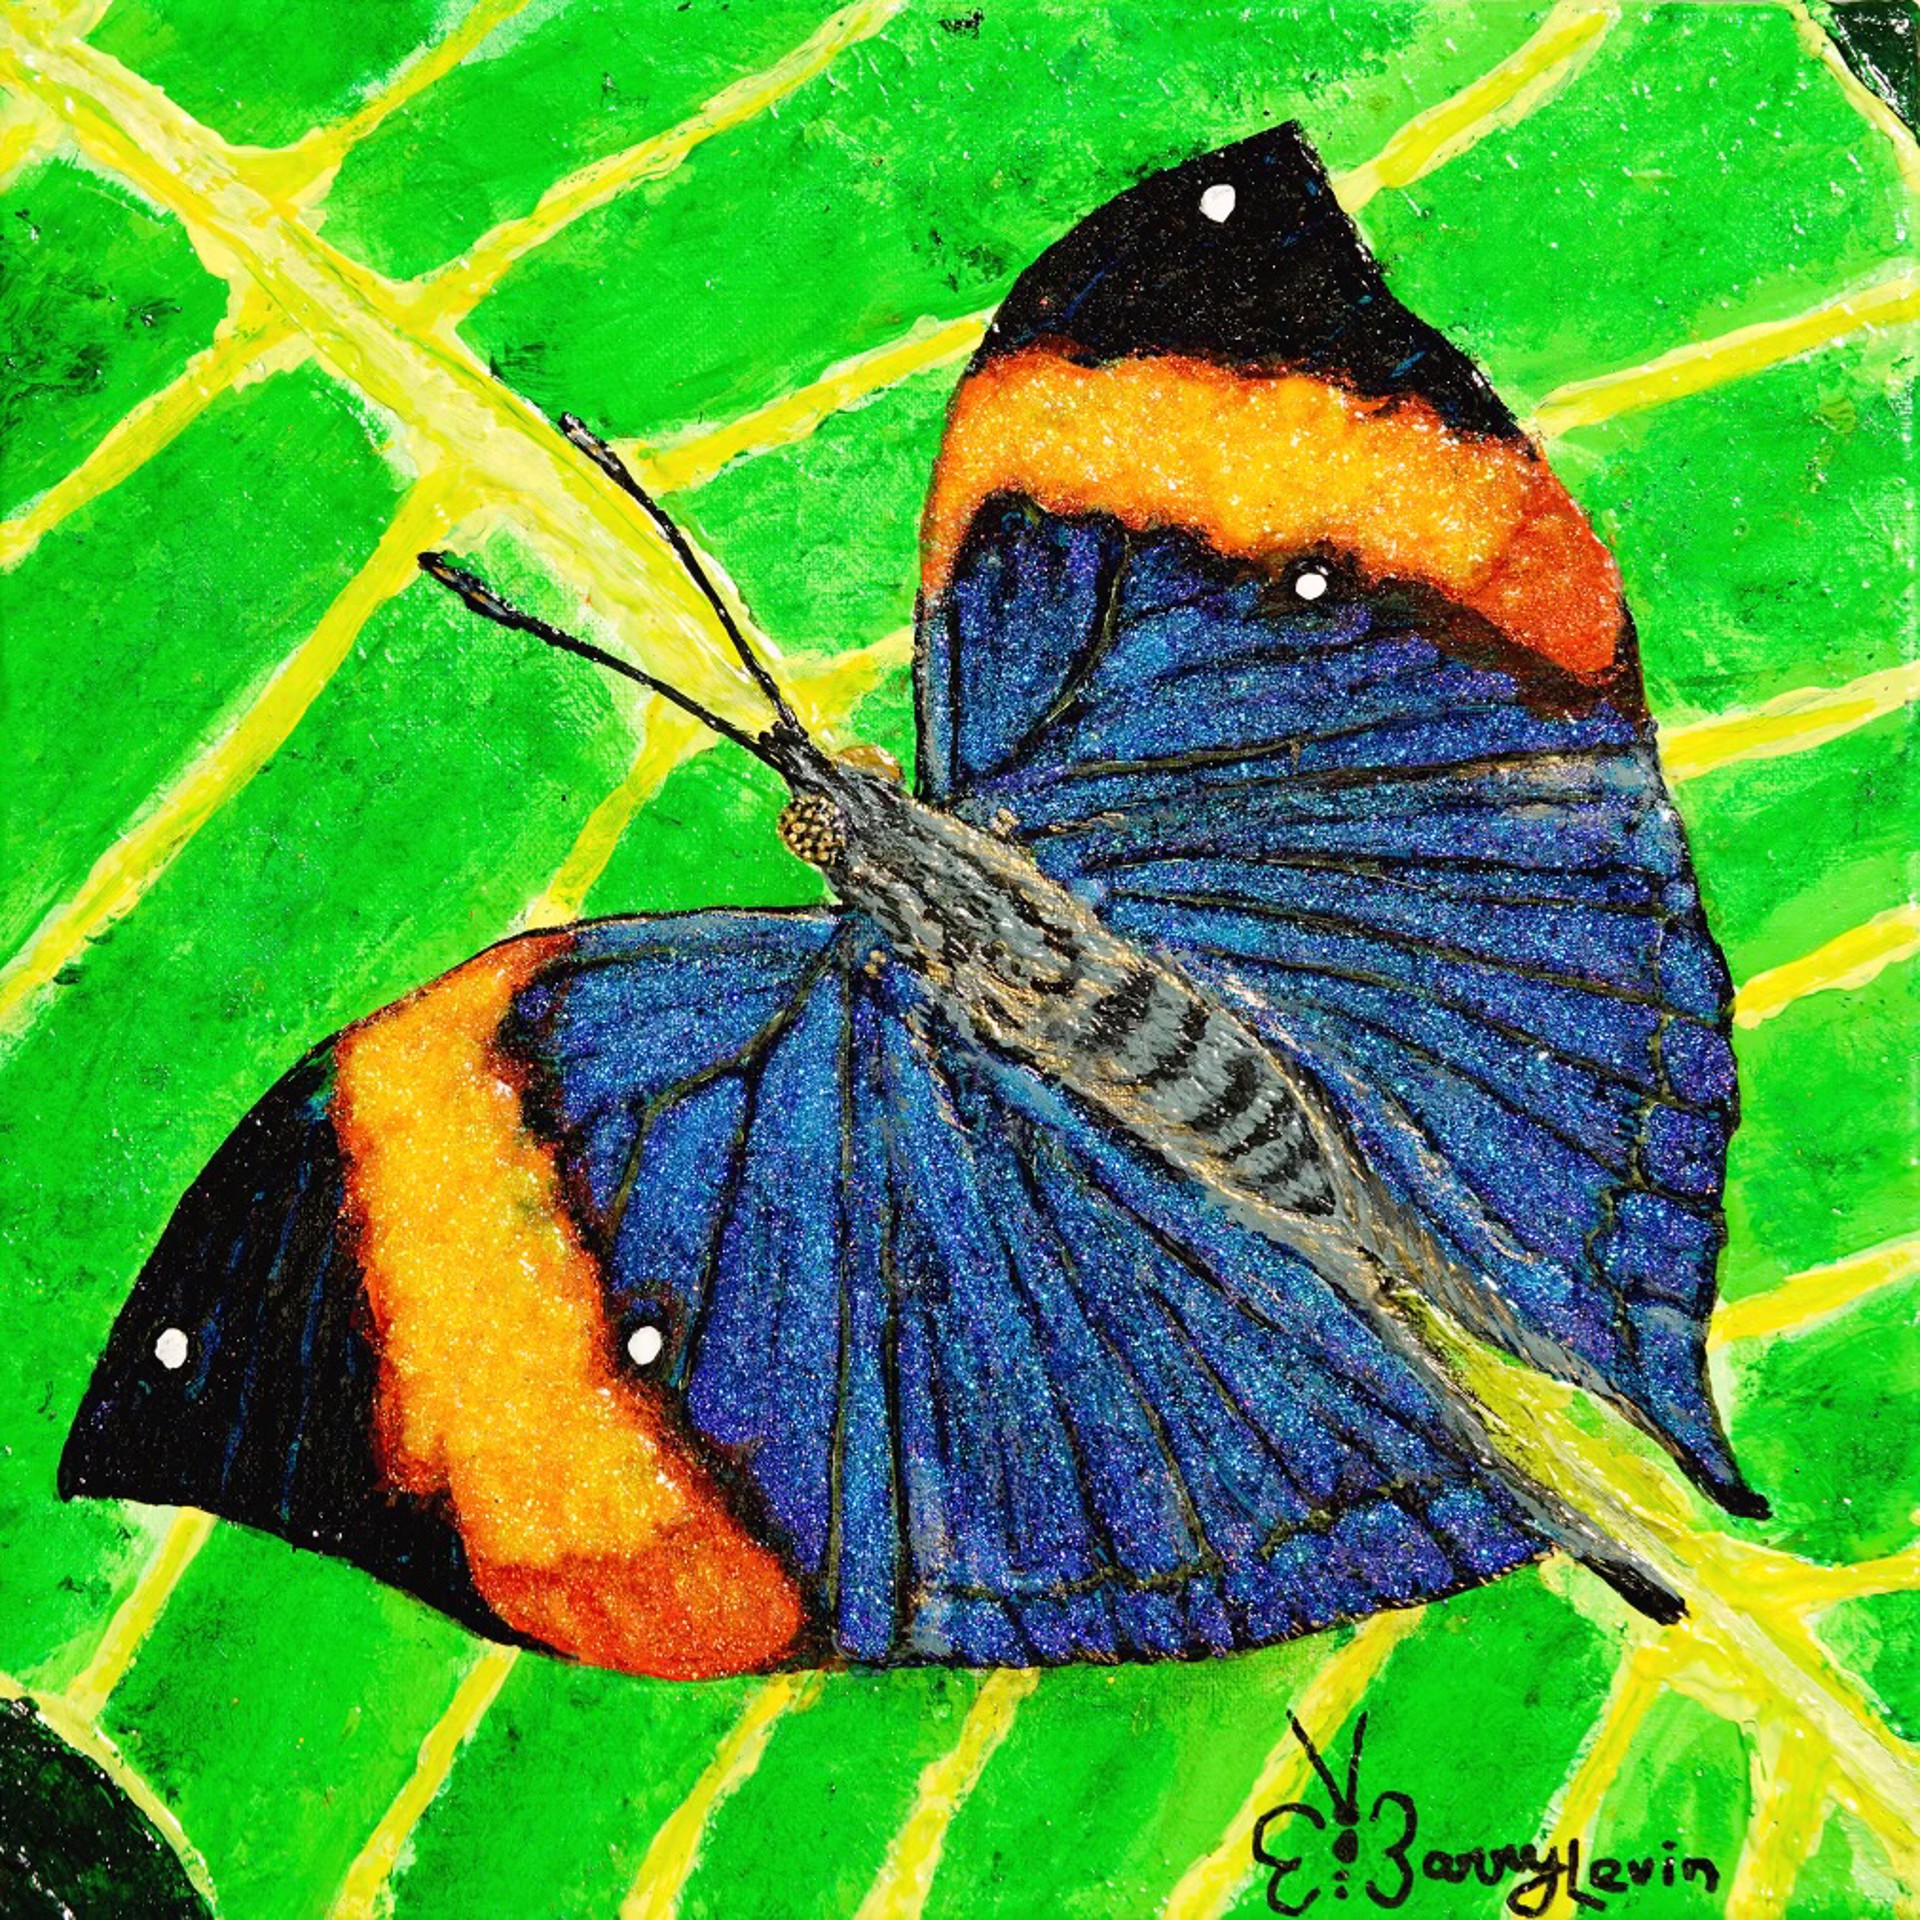 Dead Leaf Butterfly, study by Barry Levin